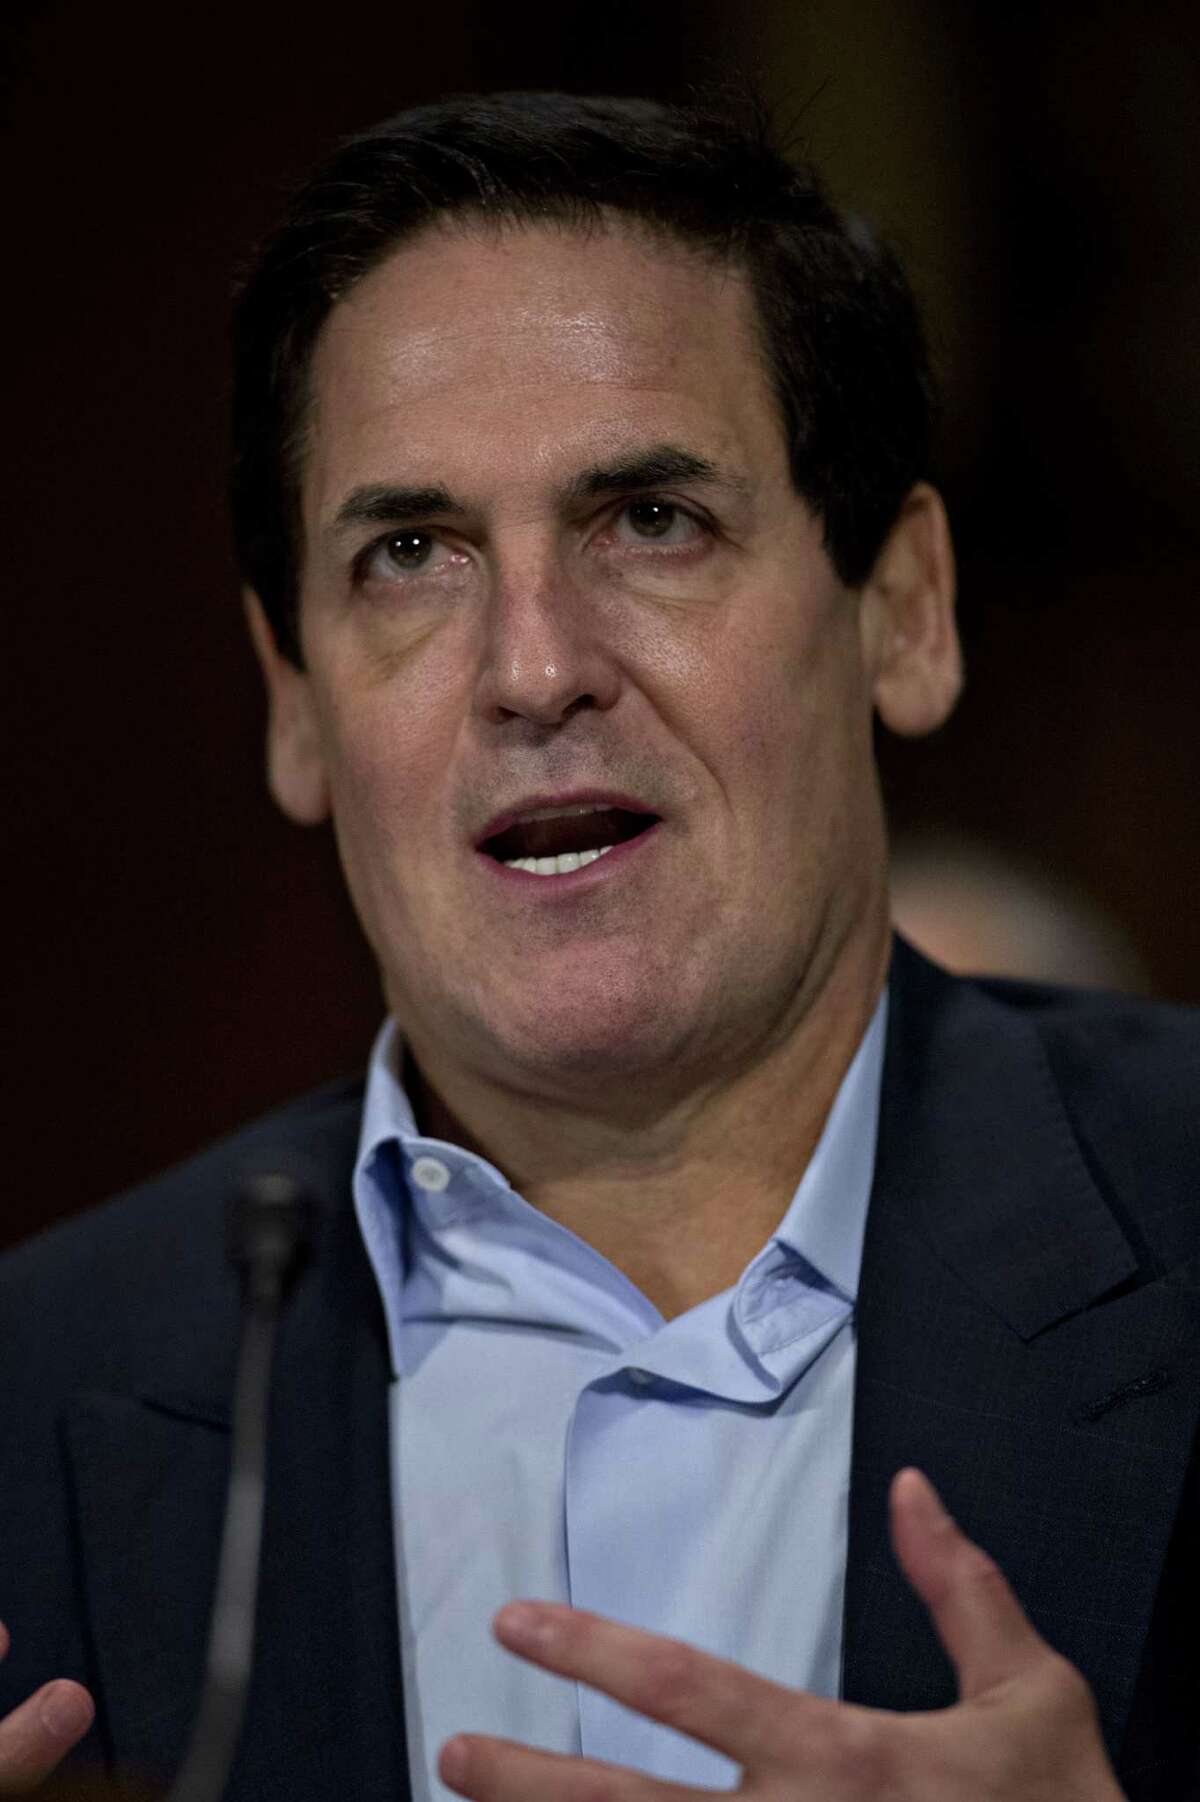 Mark Cuban, billionaire owner of the National Basketball Association's (NBA) Dallas Mavericks basketball team and chairman of AXS TV, speaks during a Senate Judiciary Subcommittee hearing in Washington, D.C., U.S., on Wednesday, Dec. 7, 2016. AT&T Inc. Chief Executive Officer Randall Stephenson told Congress his company's planned $85.4 billion purchase of HBO and CNN owner Time Warner Inc. will help the telecommunications provider challenge cable companies for customers. Photographer: Andrew Harrer/Bloomberg